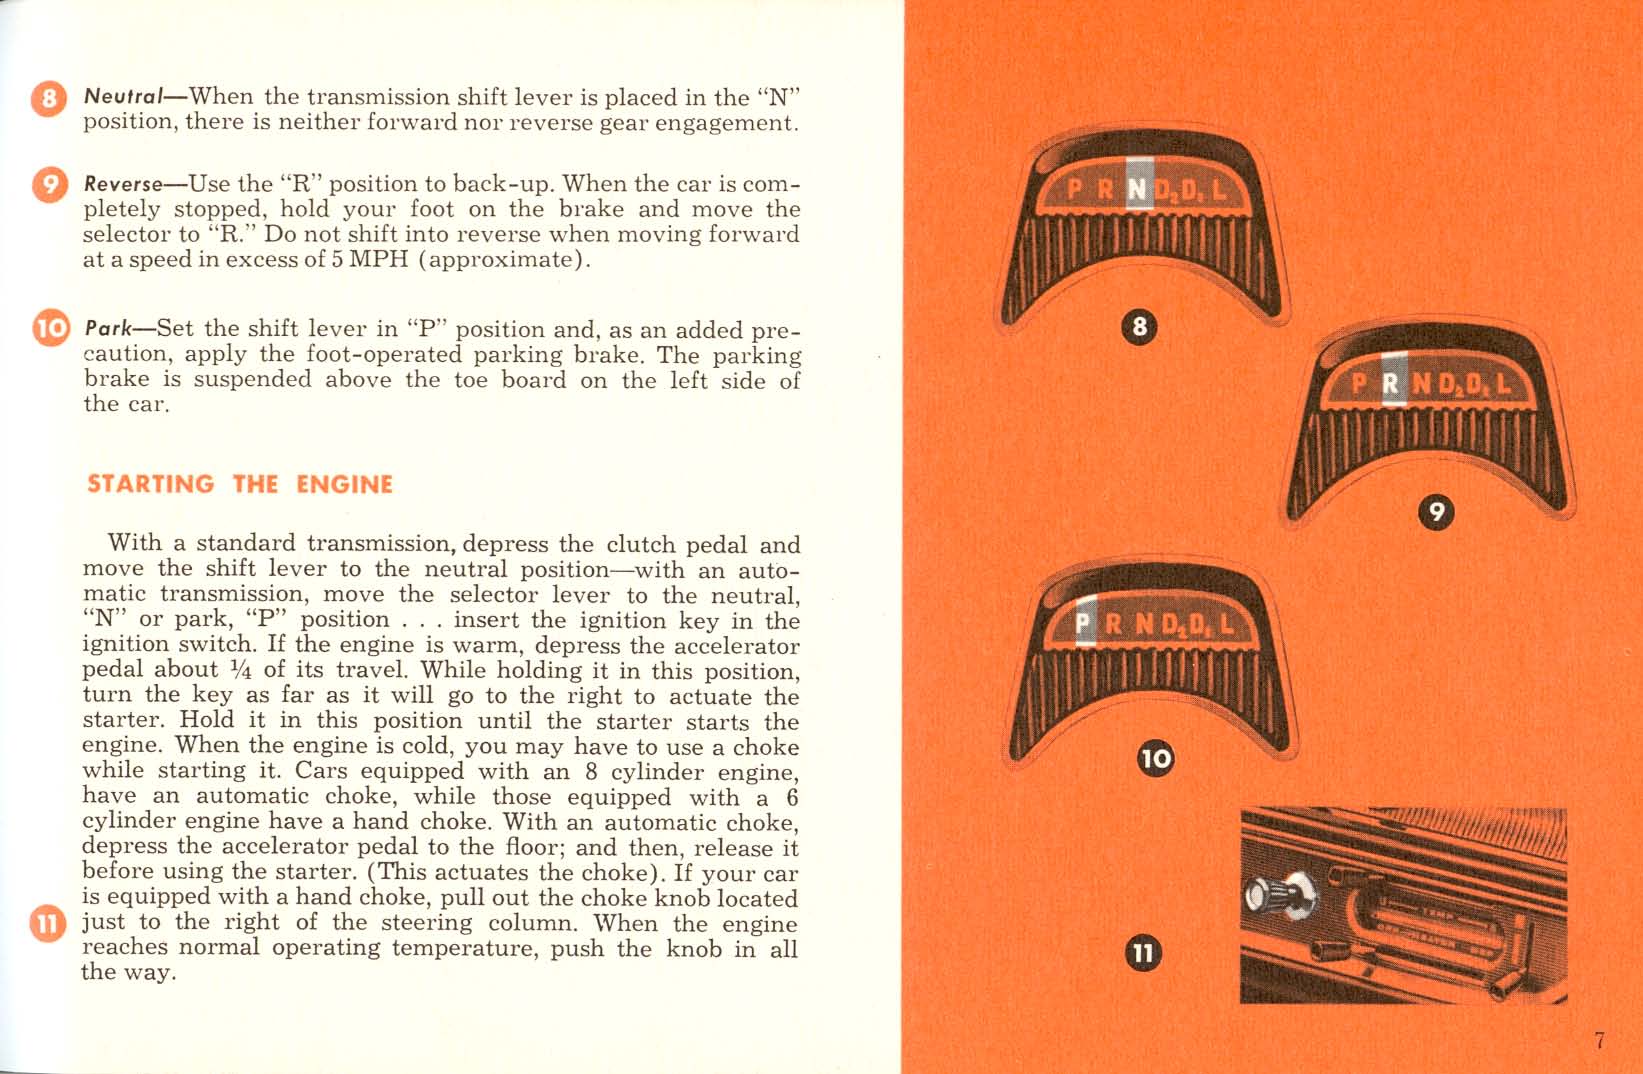 1961 Mercury Owners Manual Page 34